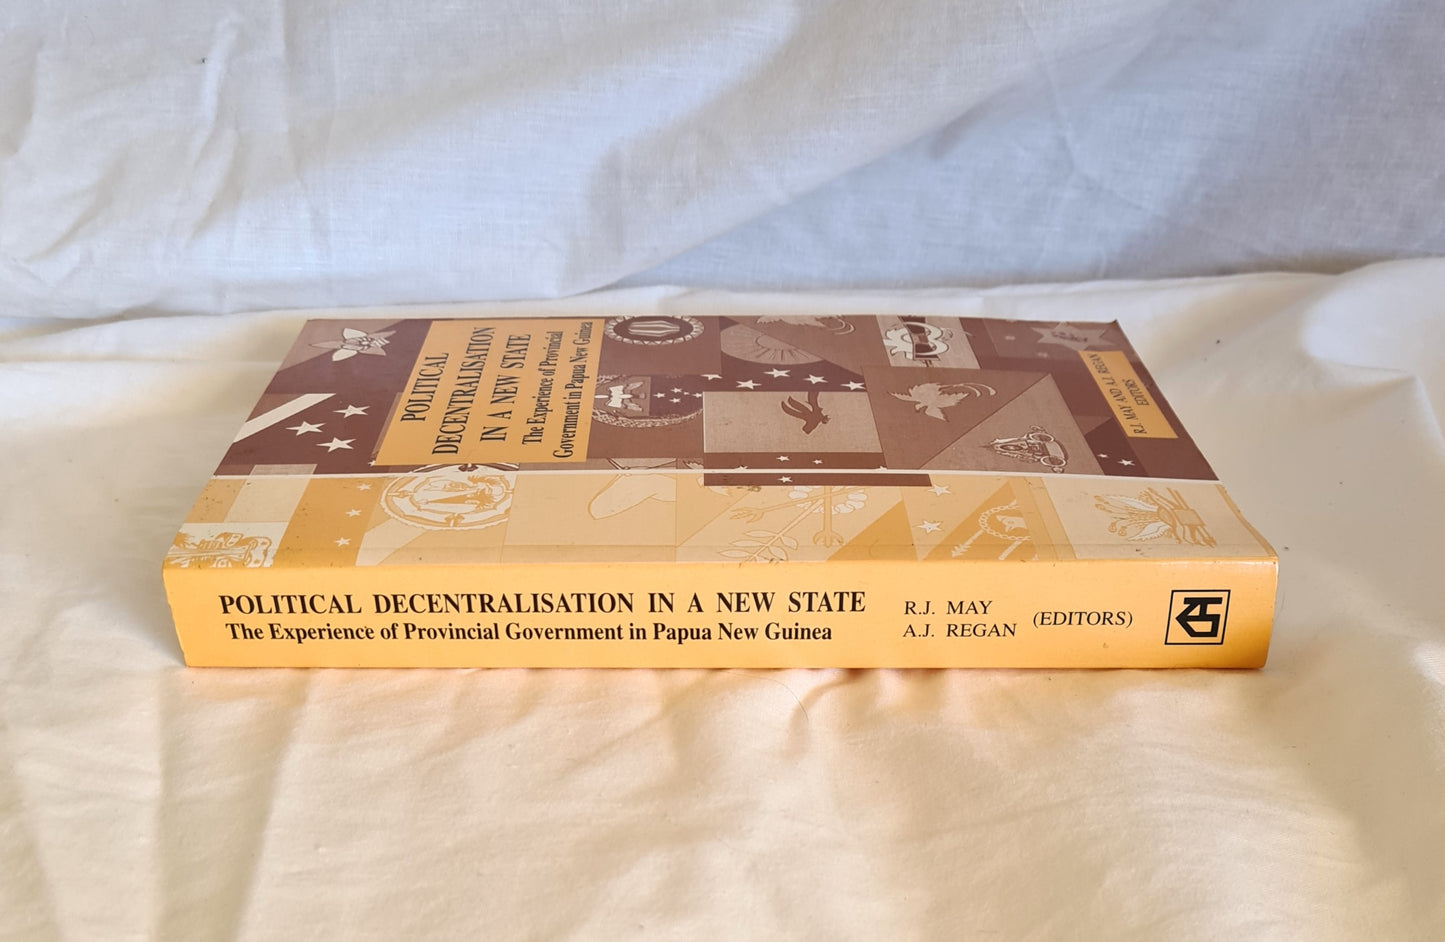 Political Decentralisation in a New State by R. J. May and A. J. Regan